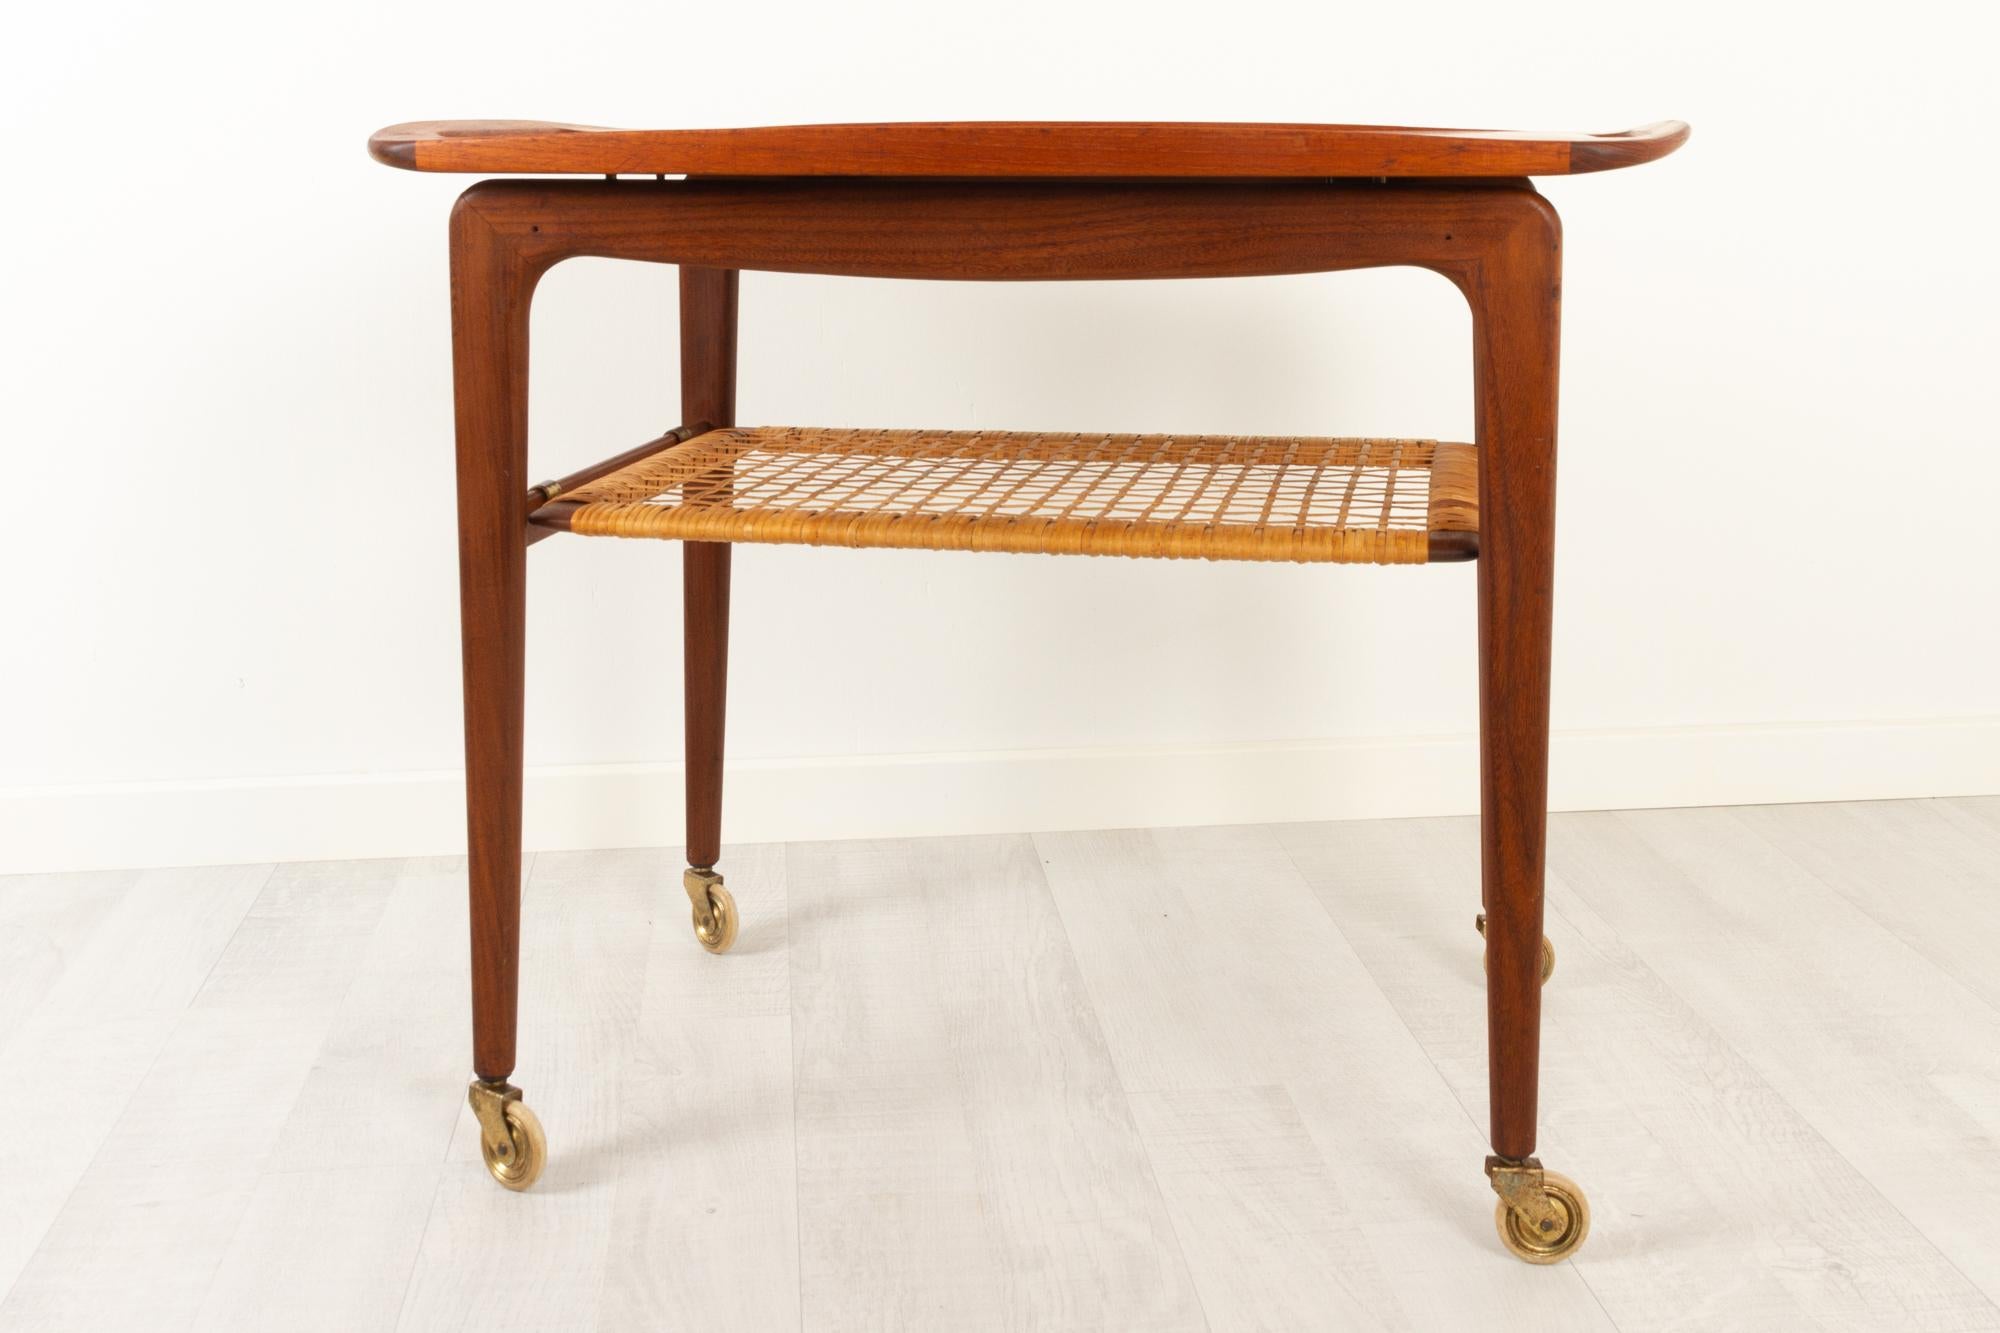 Vintage Danish teak serving trolley by Johannes Andersen, 1960s
Danish modern serving cart in teak and cane attributed to Johannes Andersen for CFC Møbler. Removable teak tray with handles in solid teak. Underlying shelf with cane, also removable.